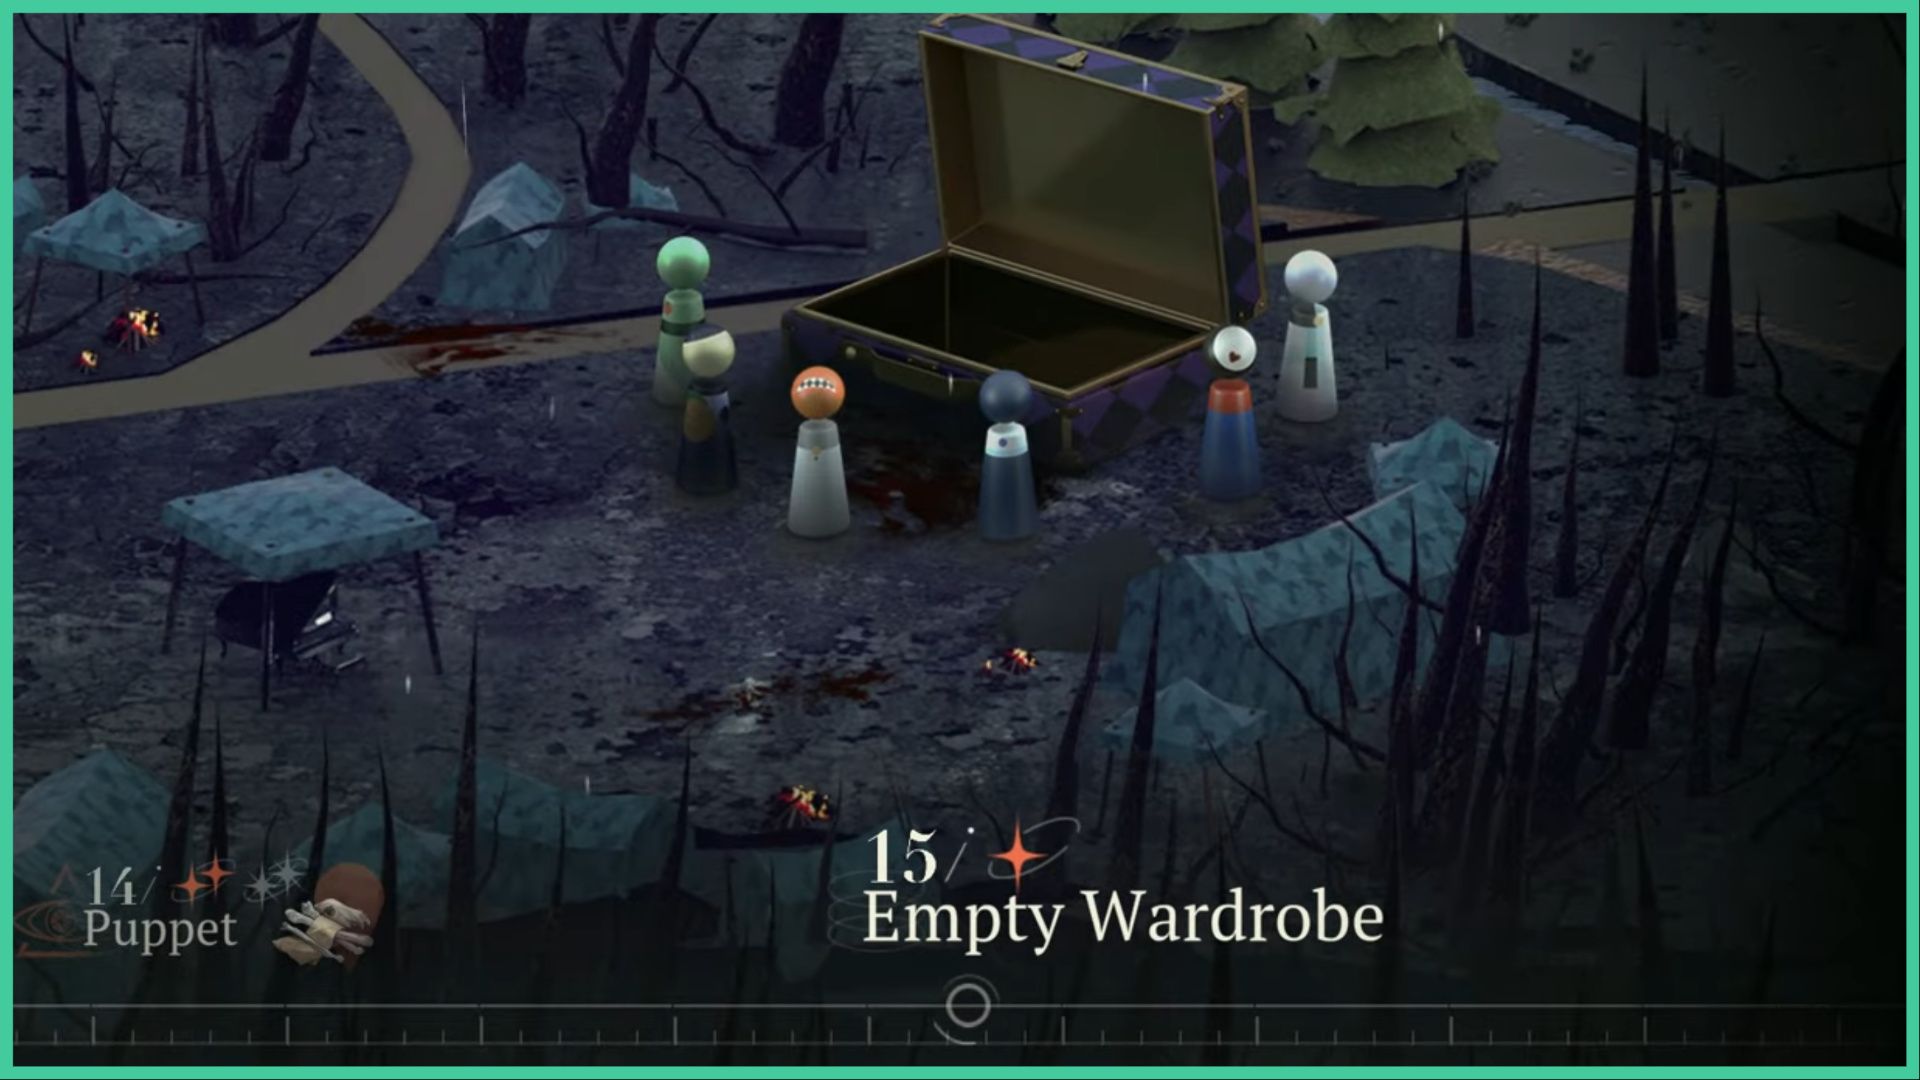 feature image for our reverse 1999 garden key guide, the image features a screenshot from the chapter 2 map of stage 15 called empty wardrobe, as small chess-like objects that are used to represent characters from the game stand around a giant open briefcase